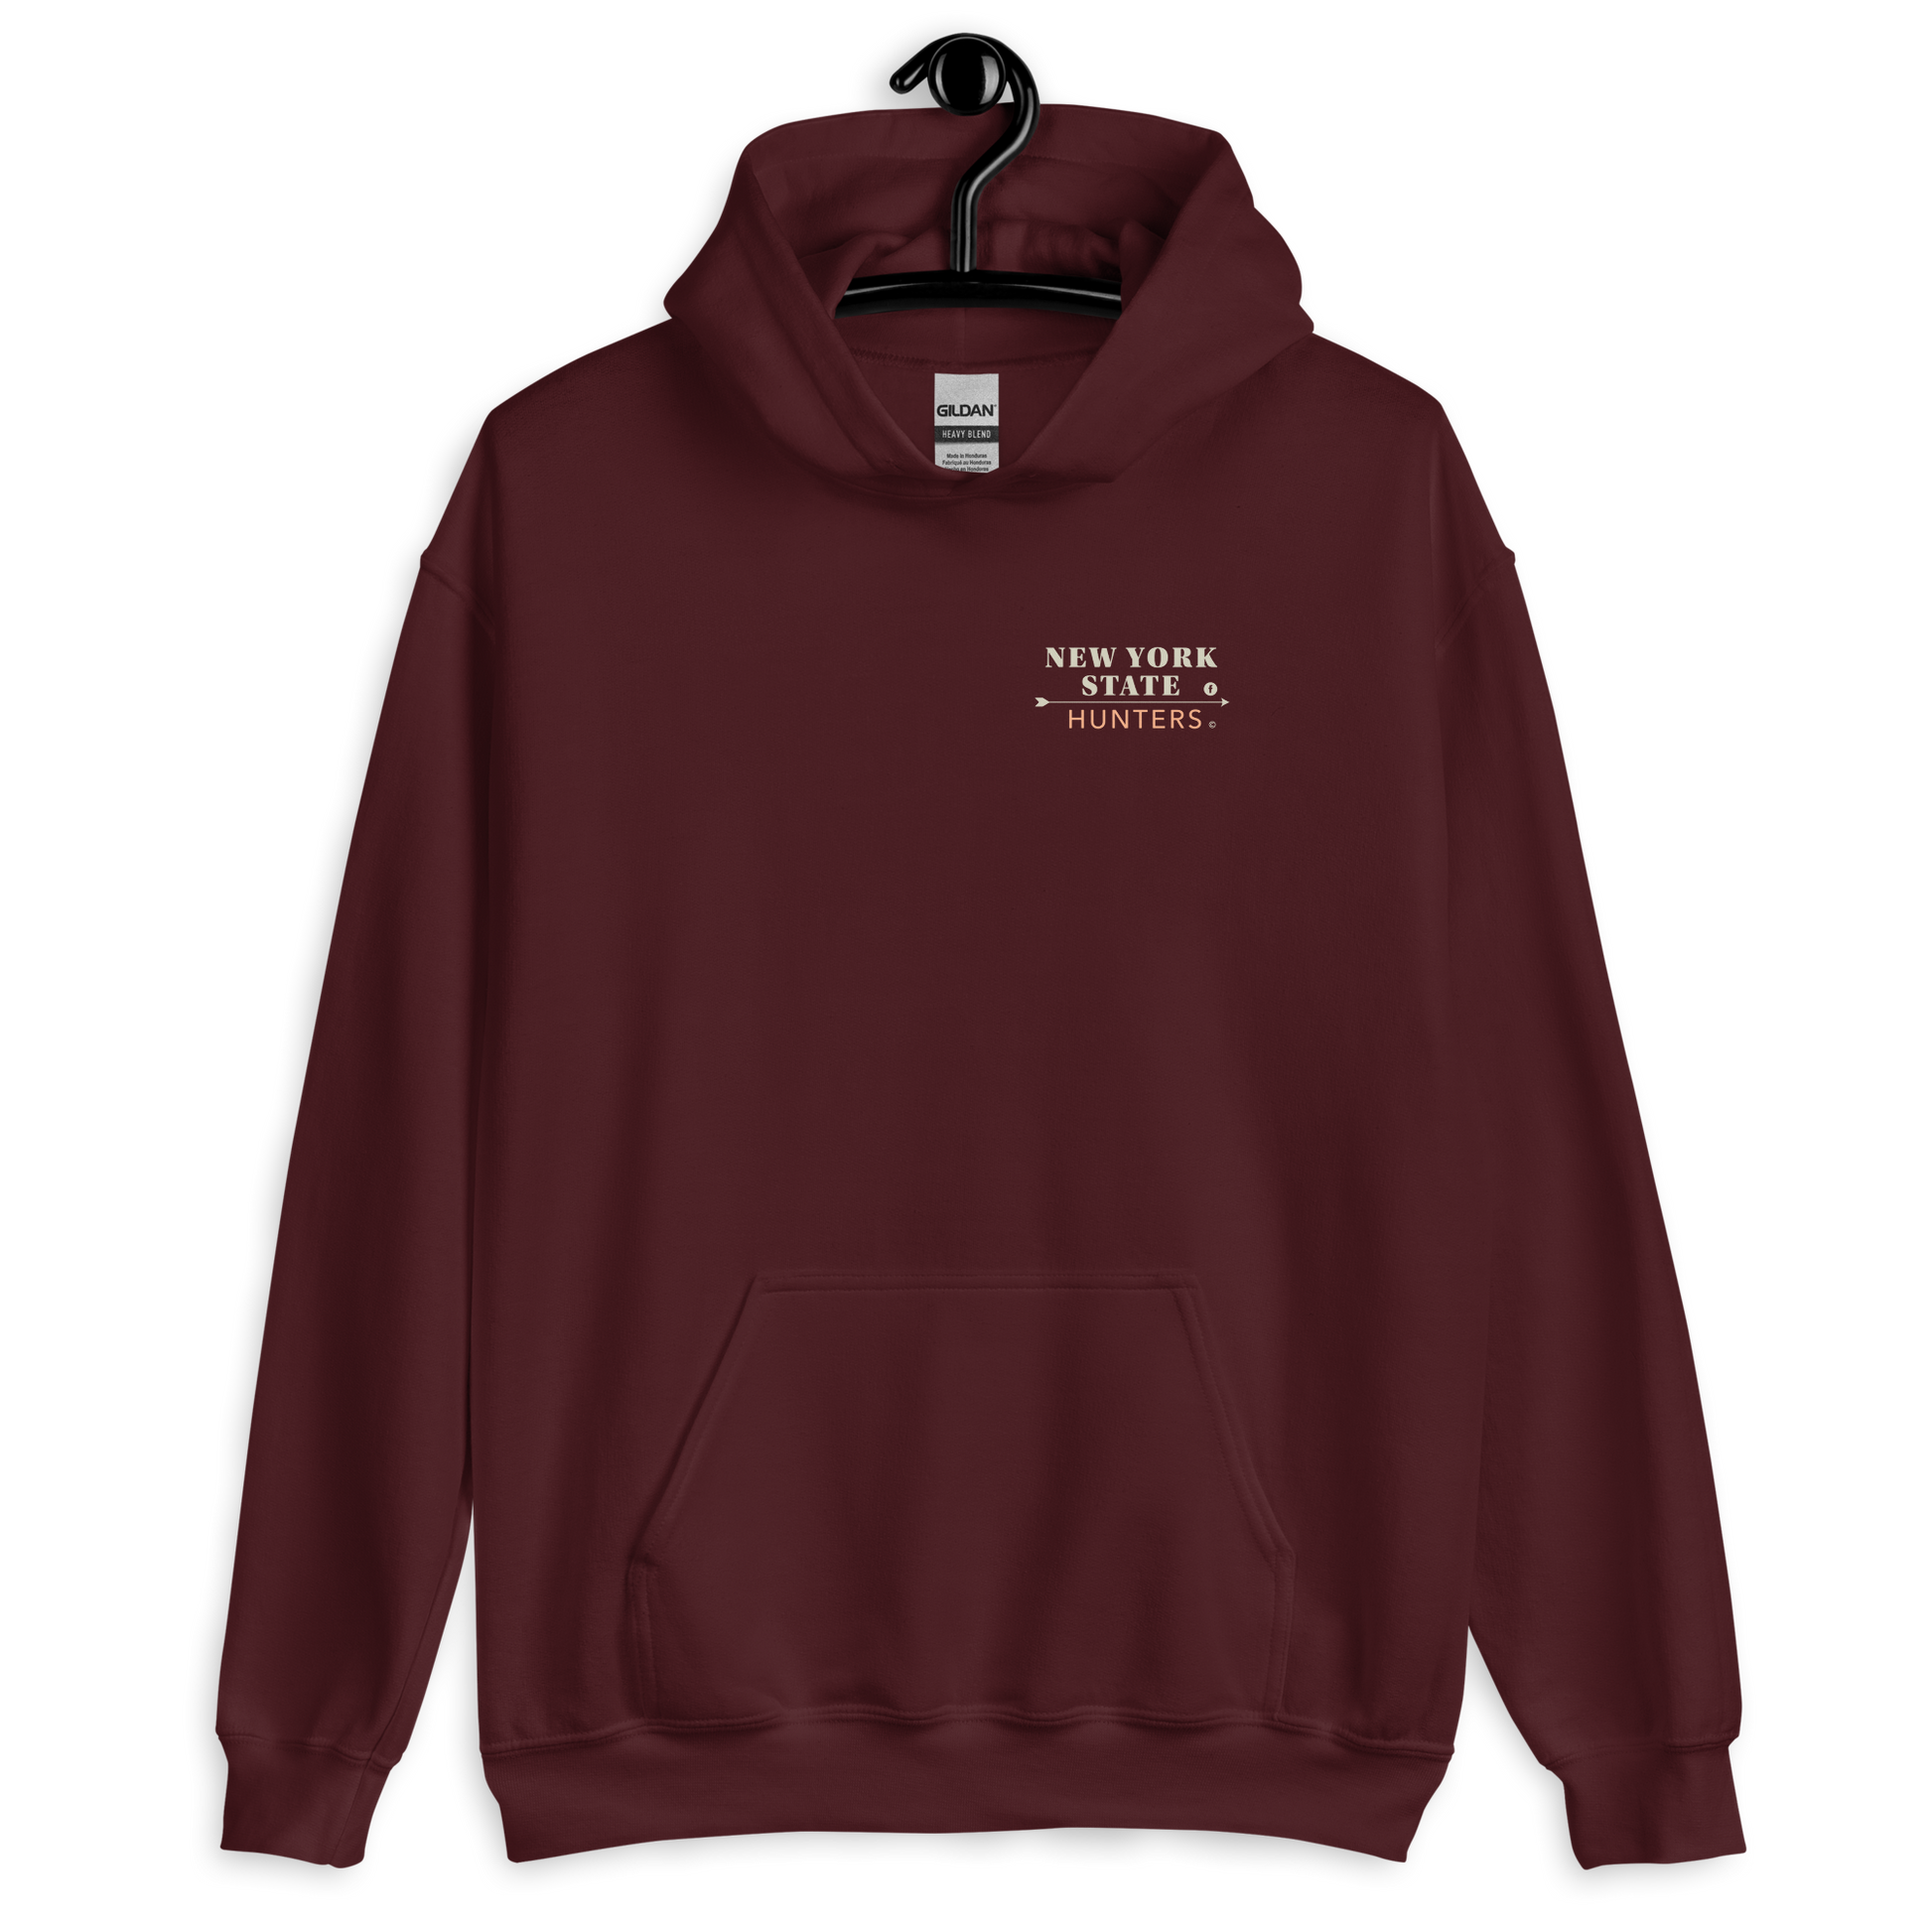 Front of New York State Hunters Hoodie in Maroon Color